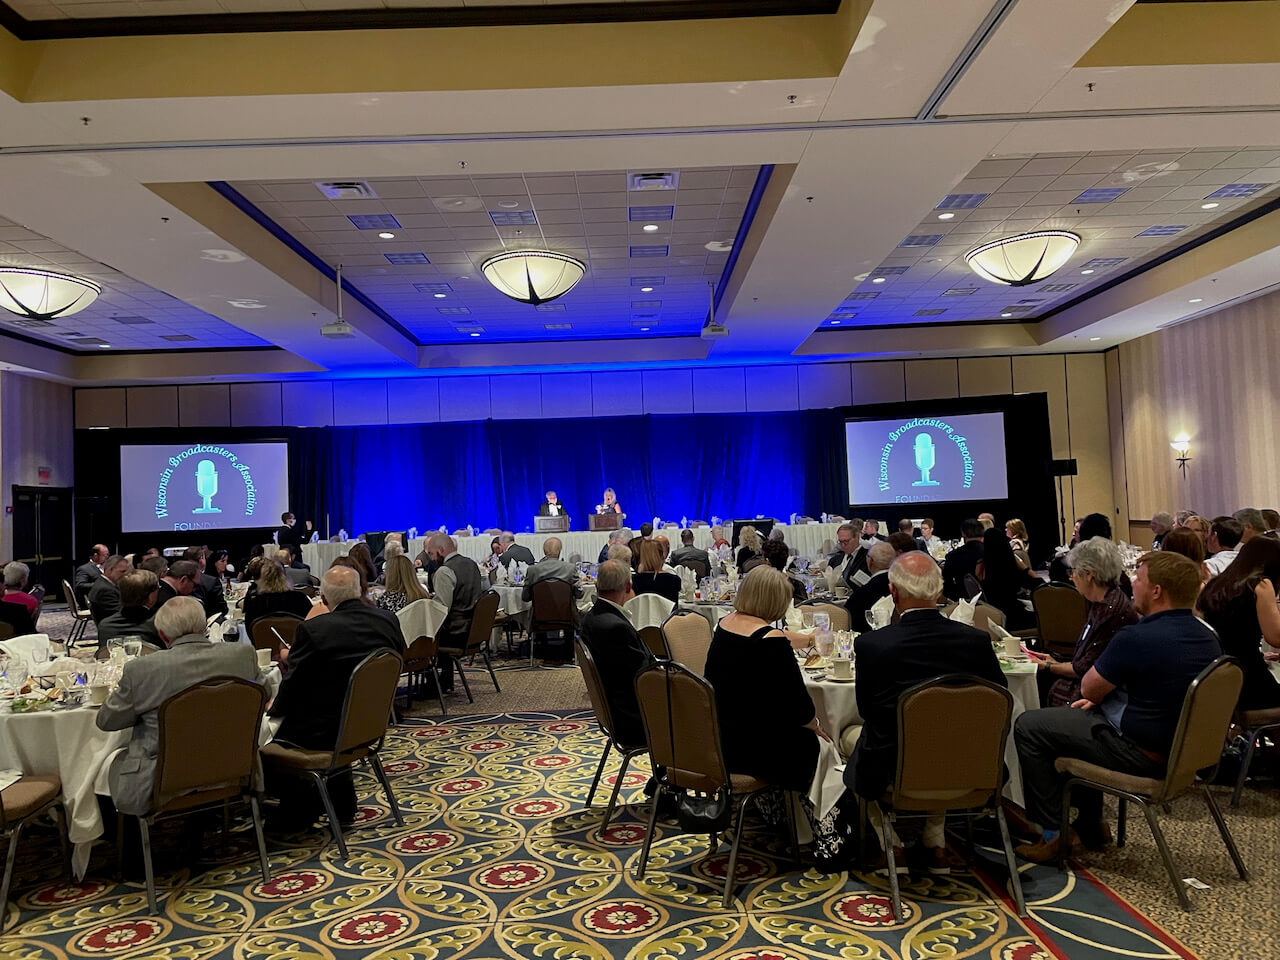 The Wisconsin Broadcasters Hall of Fame Banquet honoring Nancy Zieman in August 2021